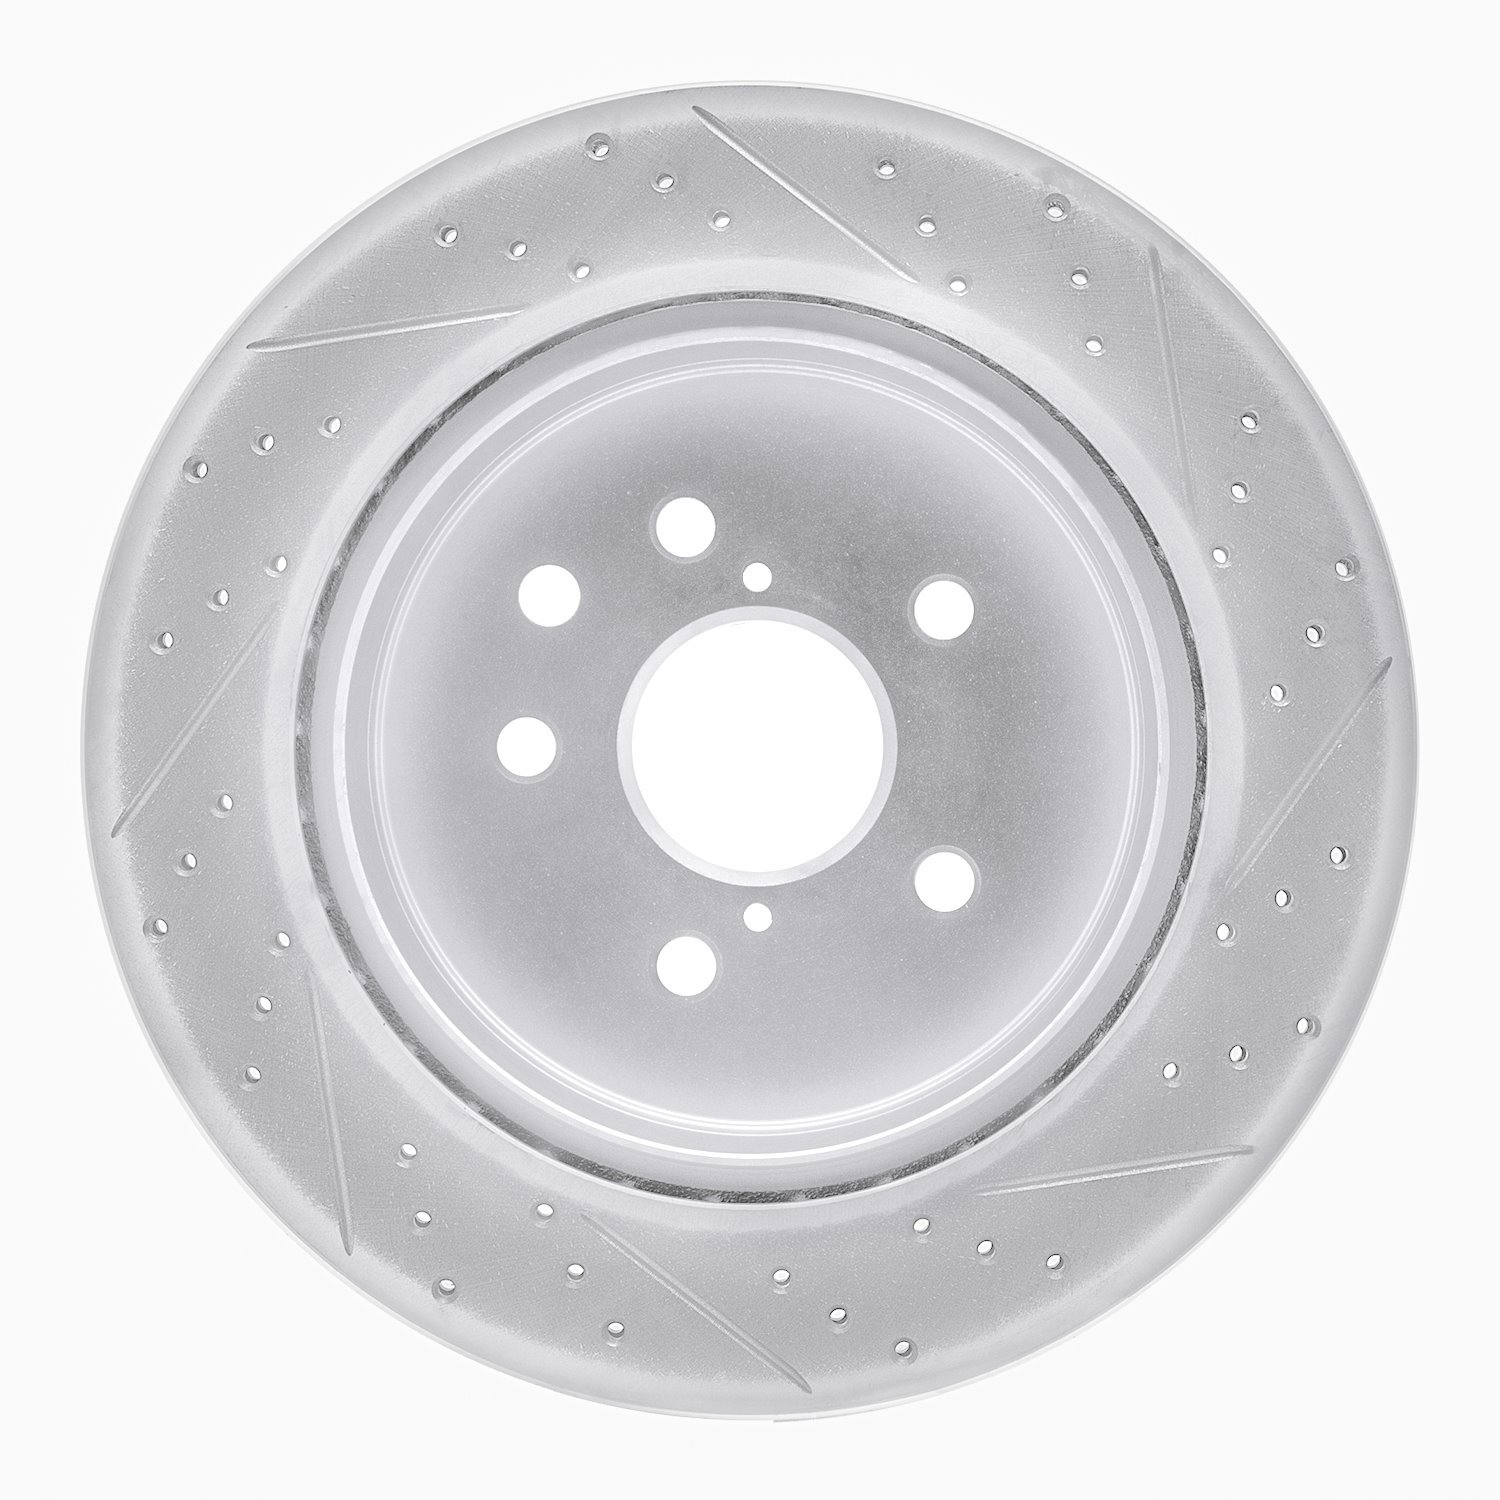 830-75015L Geoperformance Drilled/Slotted Brake Rotor, 2006-2015 Lexus/Toyota/Scion, Position: Rear Left